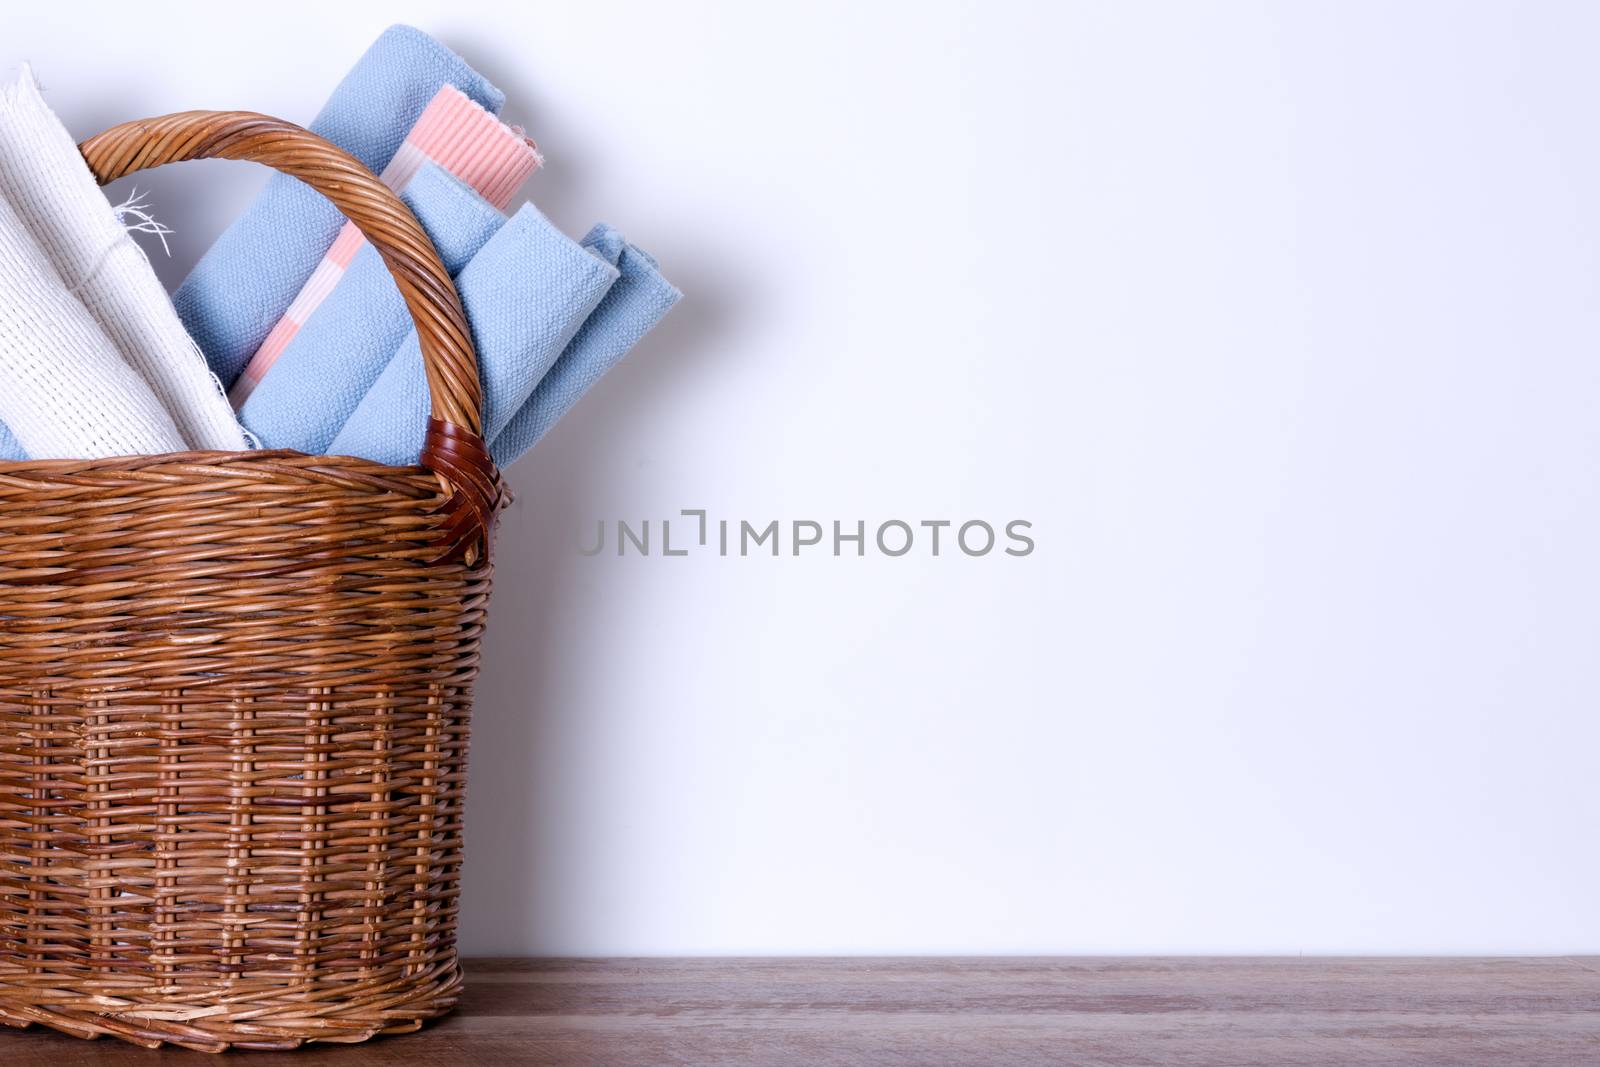 Assorted Worn Out School Rugs in a Wooden Basket Against White Wall with Copy Space.